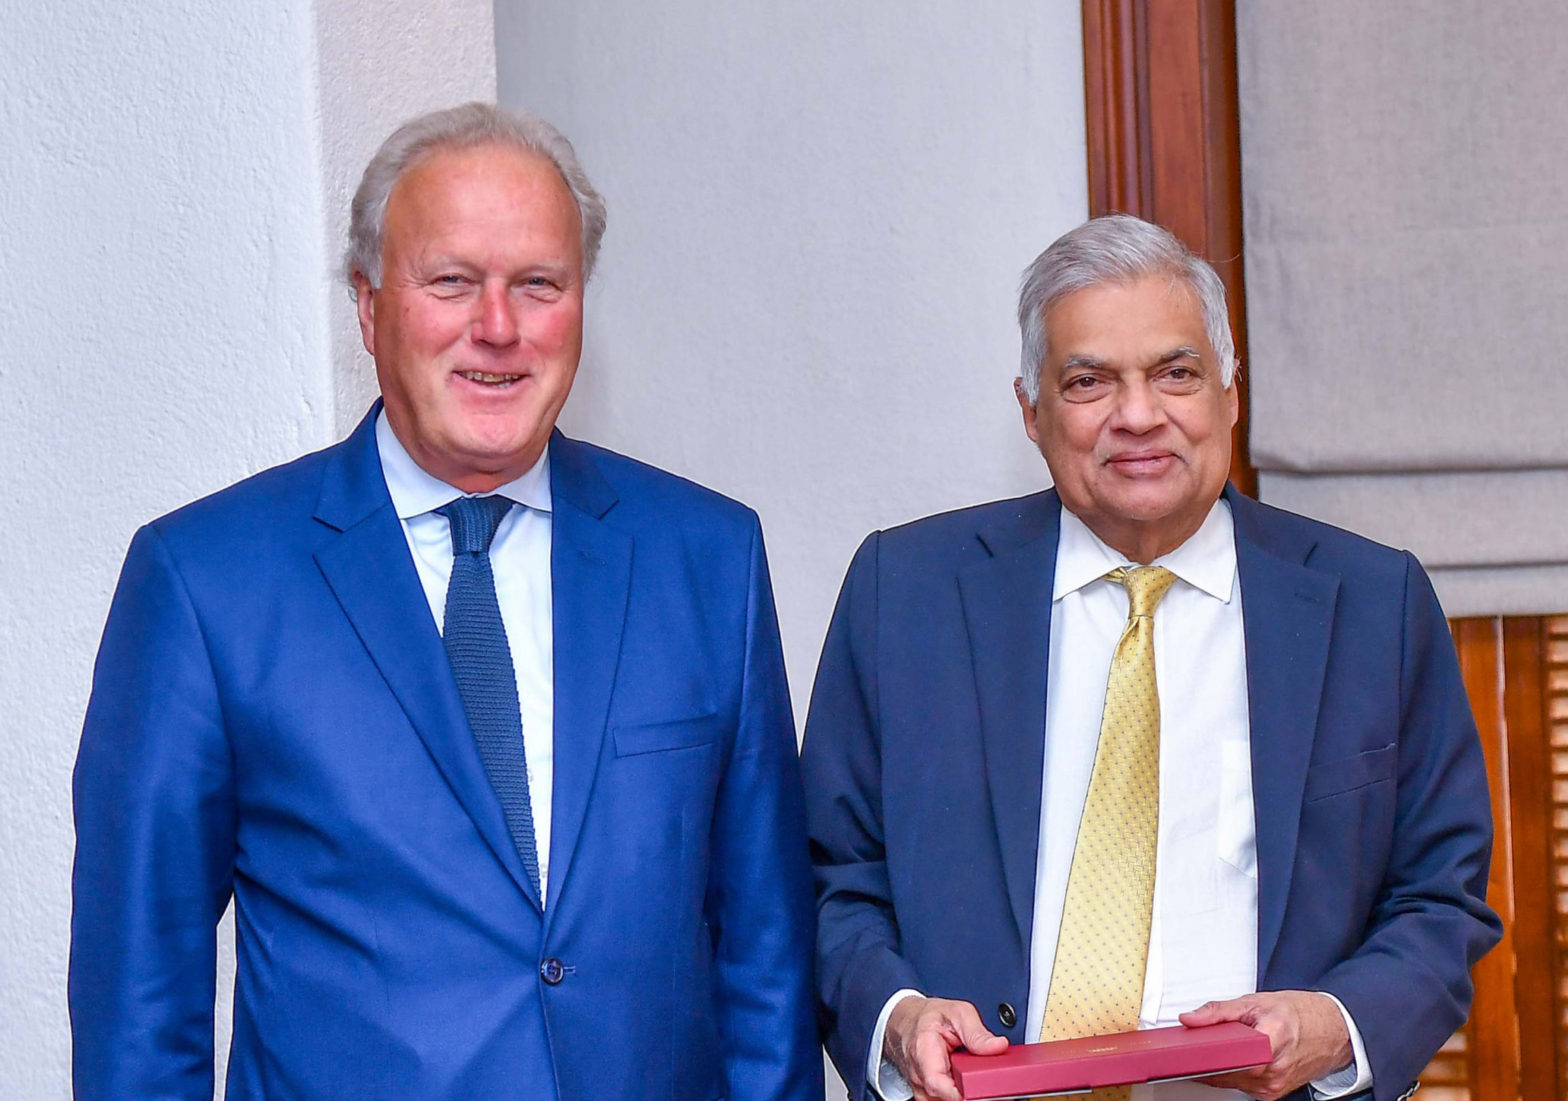 President Ranil Wickremesinghe Hosts CWEIC Chairman in Colombo, Deepening Sri Lanka-Commonwealth Relations